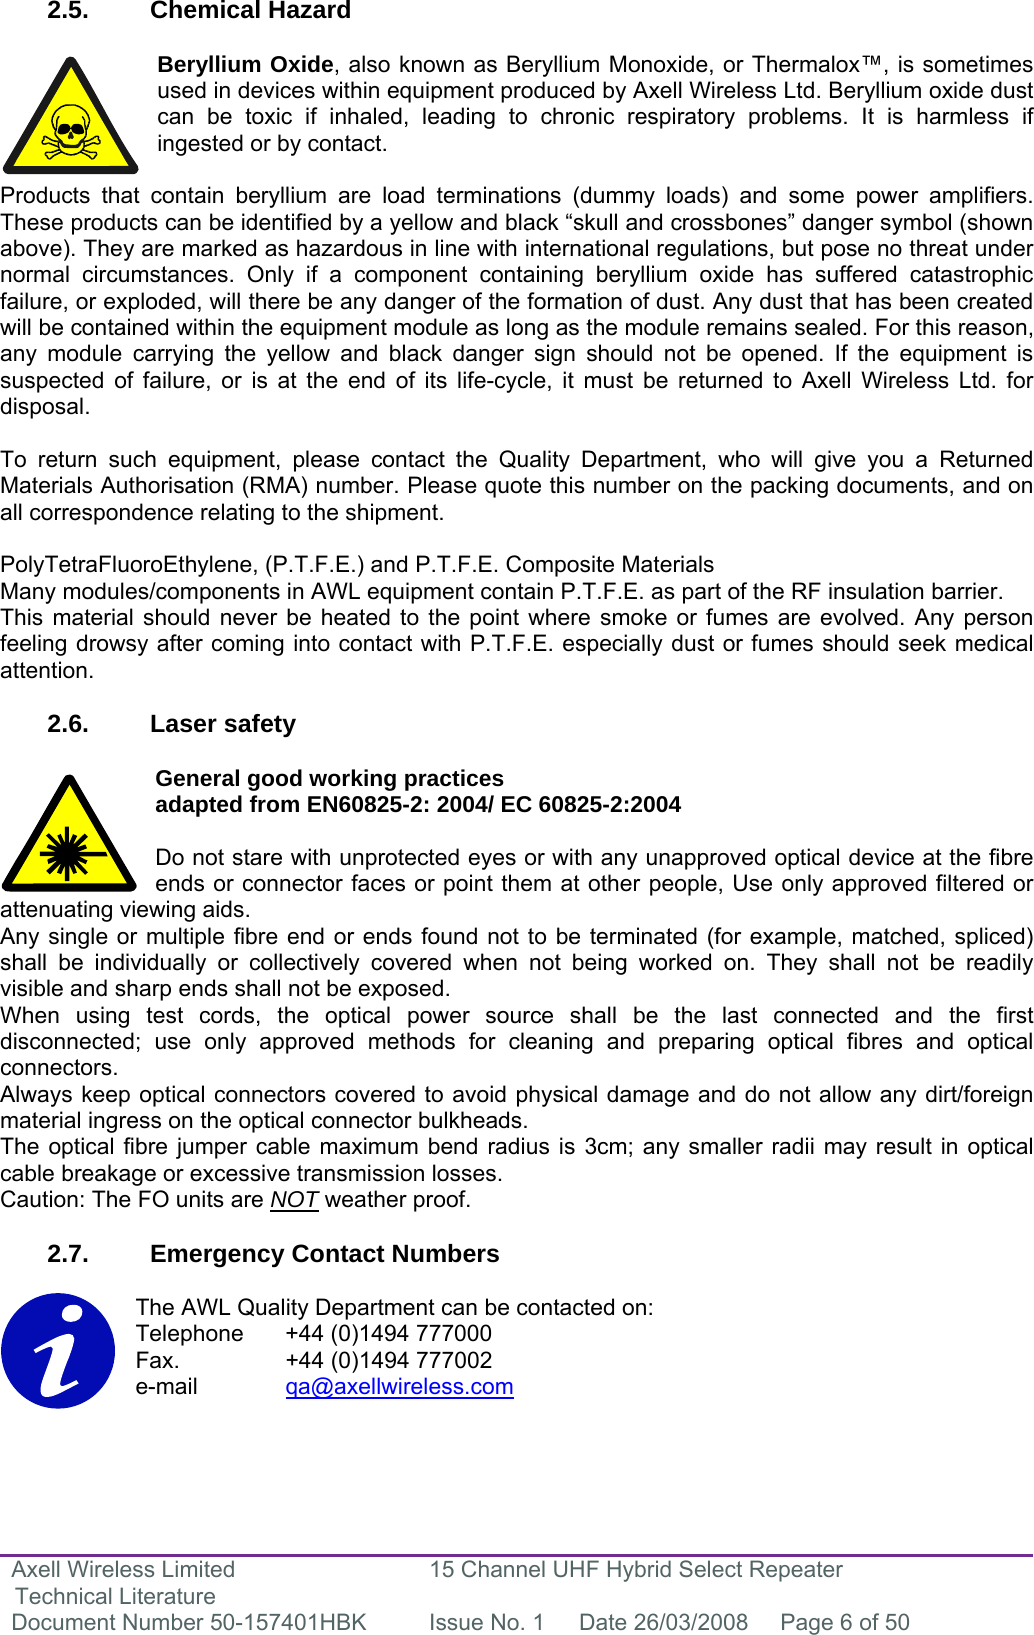 Axell Wireless Limited Technical Literature 15 Channel UHF Hybrid Select Repeater Document Number 50-157401HBK  Issue No. 1  Date 26/03/2008  Page 6 of 50   2.5. Chemical Hazard  Beryllium Oxide, also known as Beryllium Monoxide, or Thermalox™, is sometimes used in devices within equipment produced by Axell Wireless Ltd. Beryllium oxide dust can be toxic if inhaled, leading to chronic respiratory problems. It is harmless if ingested or by contact.  Products that contain beryllium are load terminations (dummy loads) and some power amplifiers. These products can be identified by a yellow and black “skull and crossbones” danger symbol (shown above). They are marked as hazardous in line with international regulations, but pose no threat under normal circumstances. Only if a component containing beryllium oxide has suffered catastrophic failure, or exploded, will there be any danger of the formation of dust. Any dust that has been created will be contained within the equipment module as long as the module remains sealed. For this reason, any module carrying the yellow and black danger sign should not be opened. If the equipment is suspected of failure, or is at the end of its life-cycle, it must be returned to Axell Wireless Ltd. for disposal.  To return such equipment, please contact the Quality Department, who will give you a Returned Materials Authorisation (RMA) number. Please quote this number on the packing documents, and on all correspondence relating to the shipment.  PolyTetraFluoroEthylene, (P.T.F.E.) and P.T.F.E. Composite Materials Many modules/components in AWL equipment contain P.T.F.E. as part of the RF insulation barrier. This material should never be heated to the point where smoke or fumes are evolved. Any person feeling drowsy after coming into contact with P.T.F.E. especially dust or fumes should seek medical attention.  2.6. Laser safety  General good working practices  adapted from EN60825-2: 2004/ EC 60825-2:2004  Do not stare with unprotected eyes or with any unapproved optical device at the fibre ends or connector faces or point them at other people, Use only approved filtered or attenuating viewing aids. Any single or multiple fibre end or ends found not to be terminated (for example, matched, spliced) shall be individually or collectively covered when not being worked on. They shall not be readily visible and sharp ends shall not be exposed. When using test cords, the optical power source shall be the last connected and the first disconnected; use only approved methods for cleaning and preparing optical fibres and optical connectors. Always keep optical connectors covered to avoid physical damage and do not allow any dirt/foreign material ingress on the optical connector bulkheads. The optical fibre jumper cable maximum bend radius is 3cm; any smaller radii may result in optical cable breakage or excessive transmission losses. Caution: The FO units are NOT weather proof.  2.7.  Emergency Contact Numbers  The AWL Quality Department can be contacted on: Telephone   +44 (0)1494 777000 Fax.    +44 (0)1494 777002 e-mail   qa@axellwireless.com    